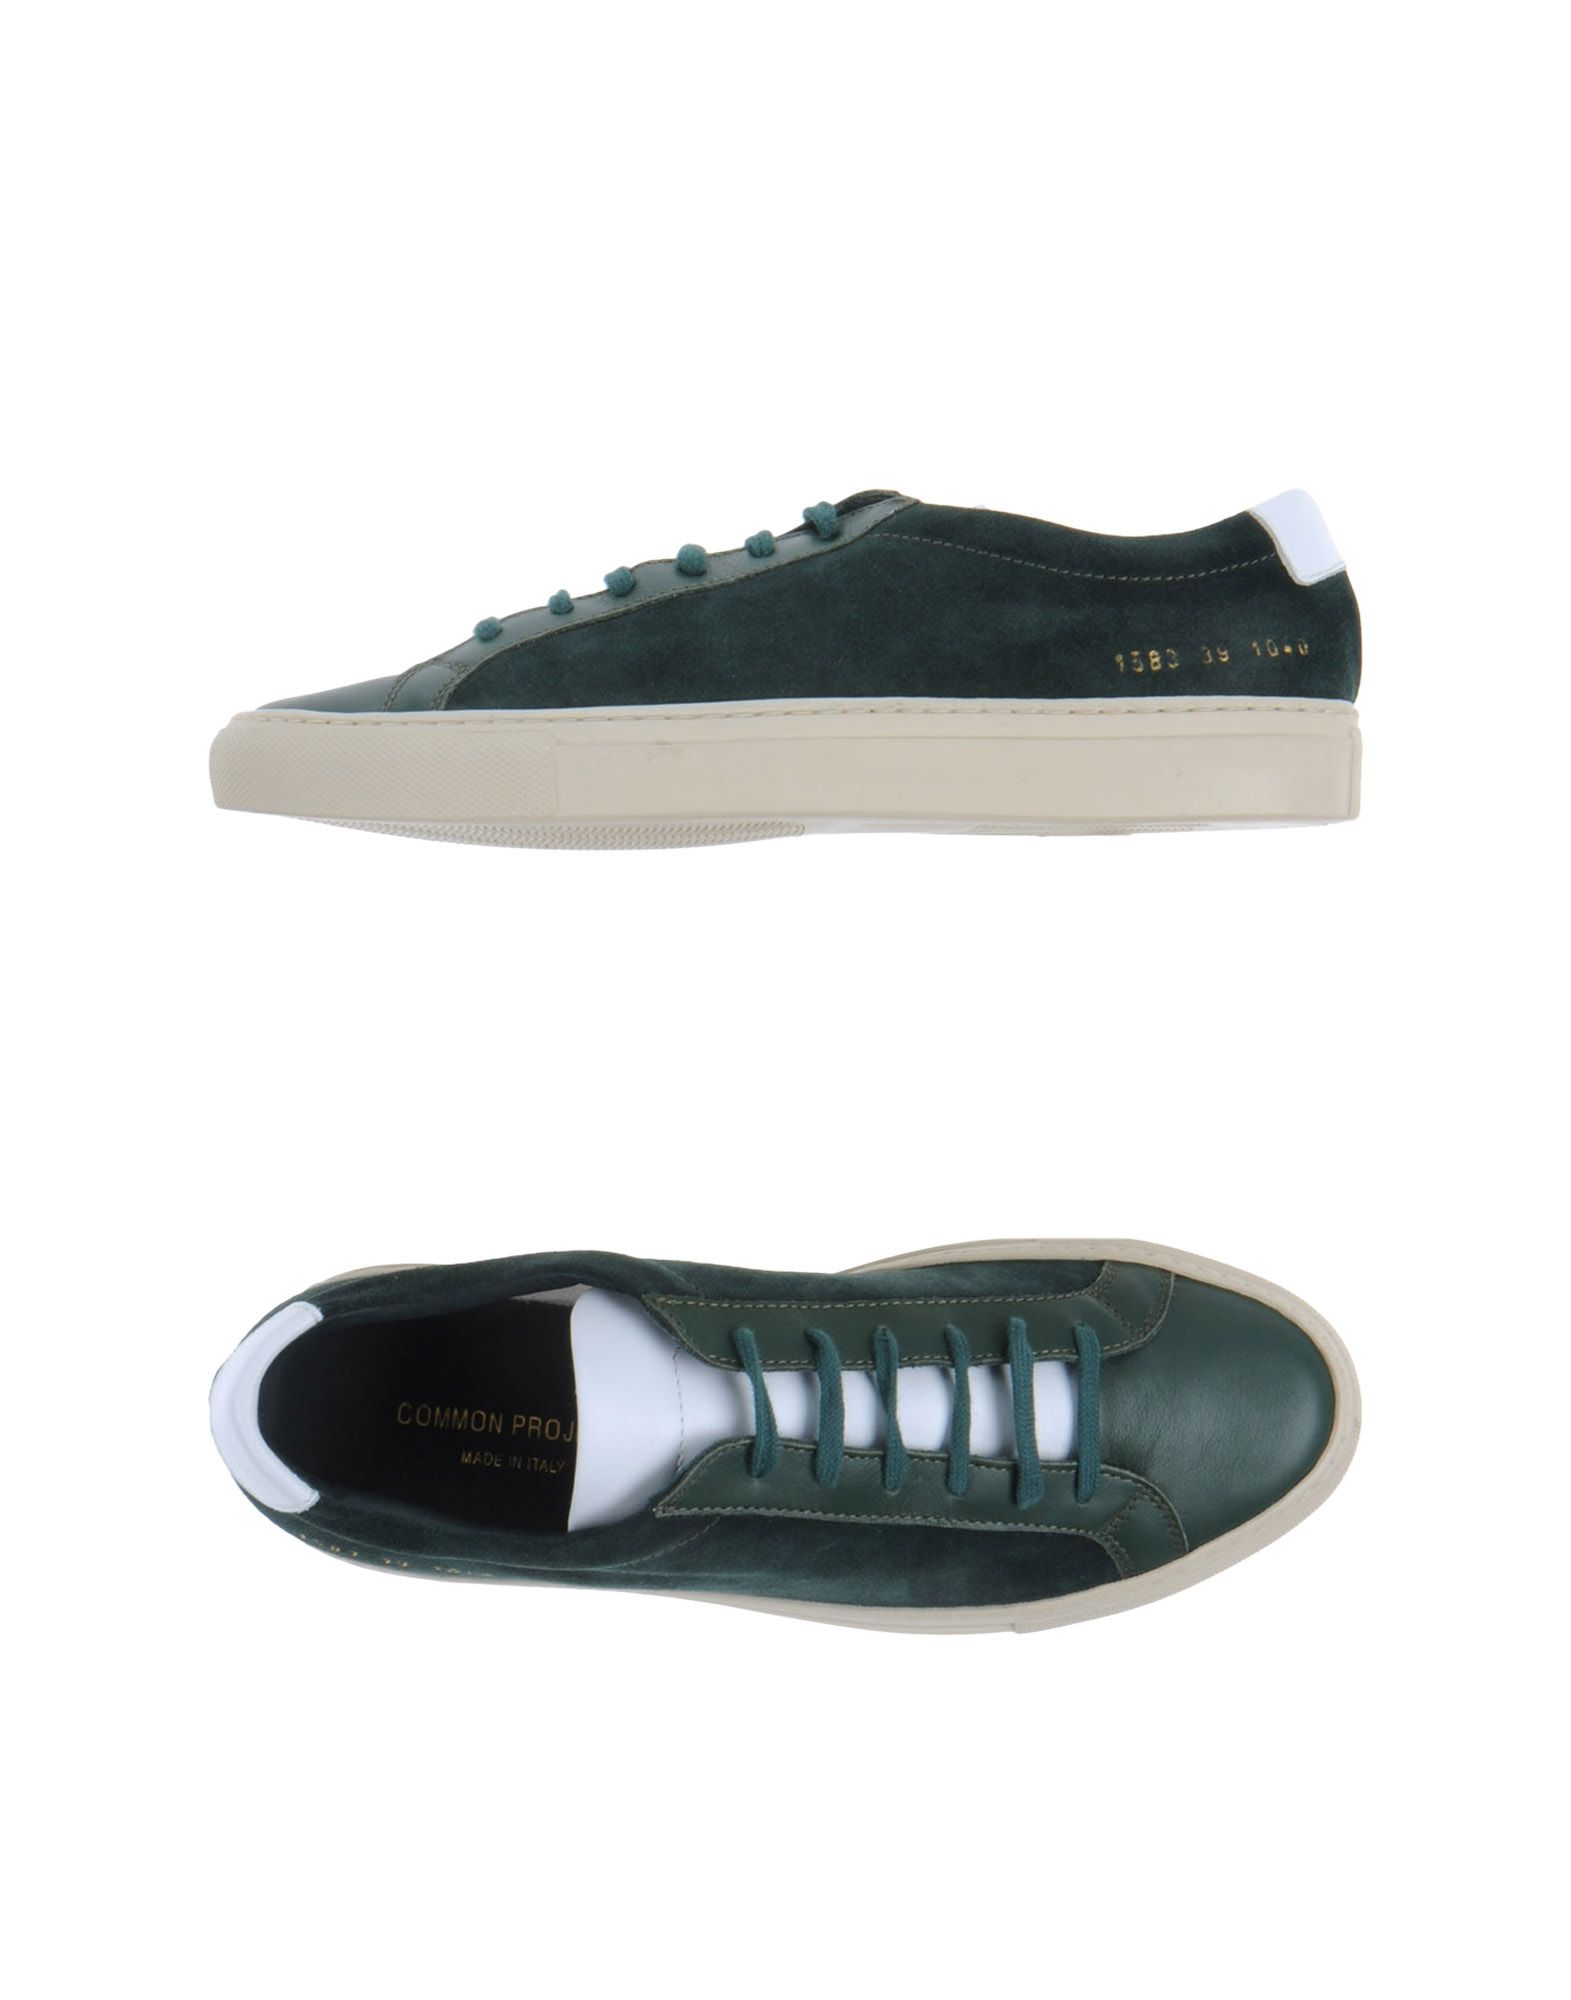 Foto Common Projects Sneakers Hombre Verde oscuro